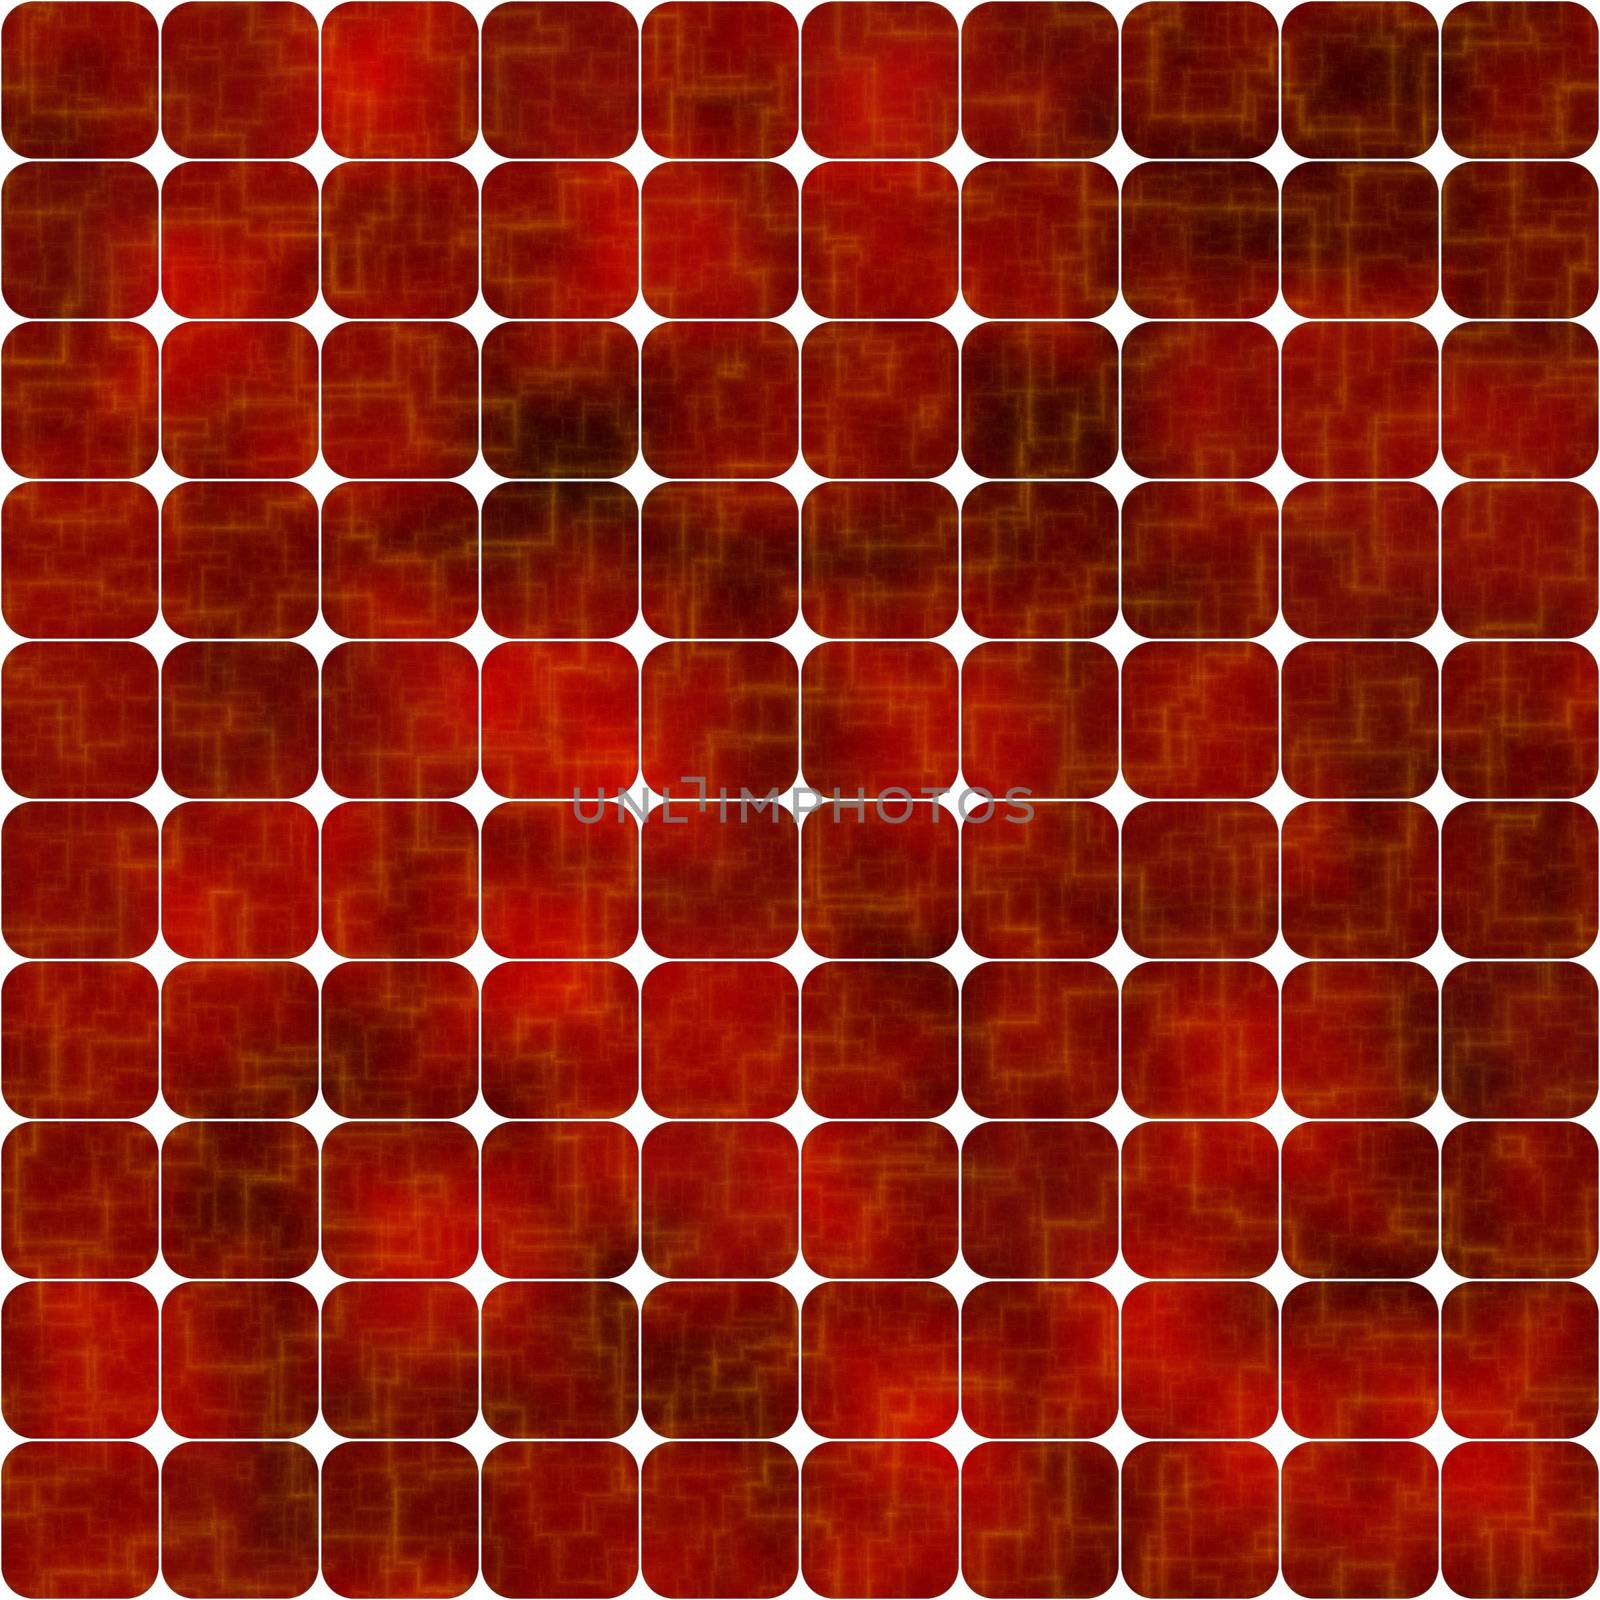 red solar cells background, tiles seamlessly as a pattern